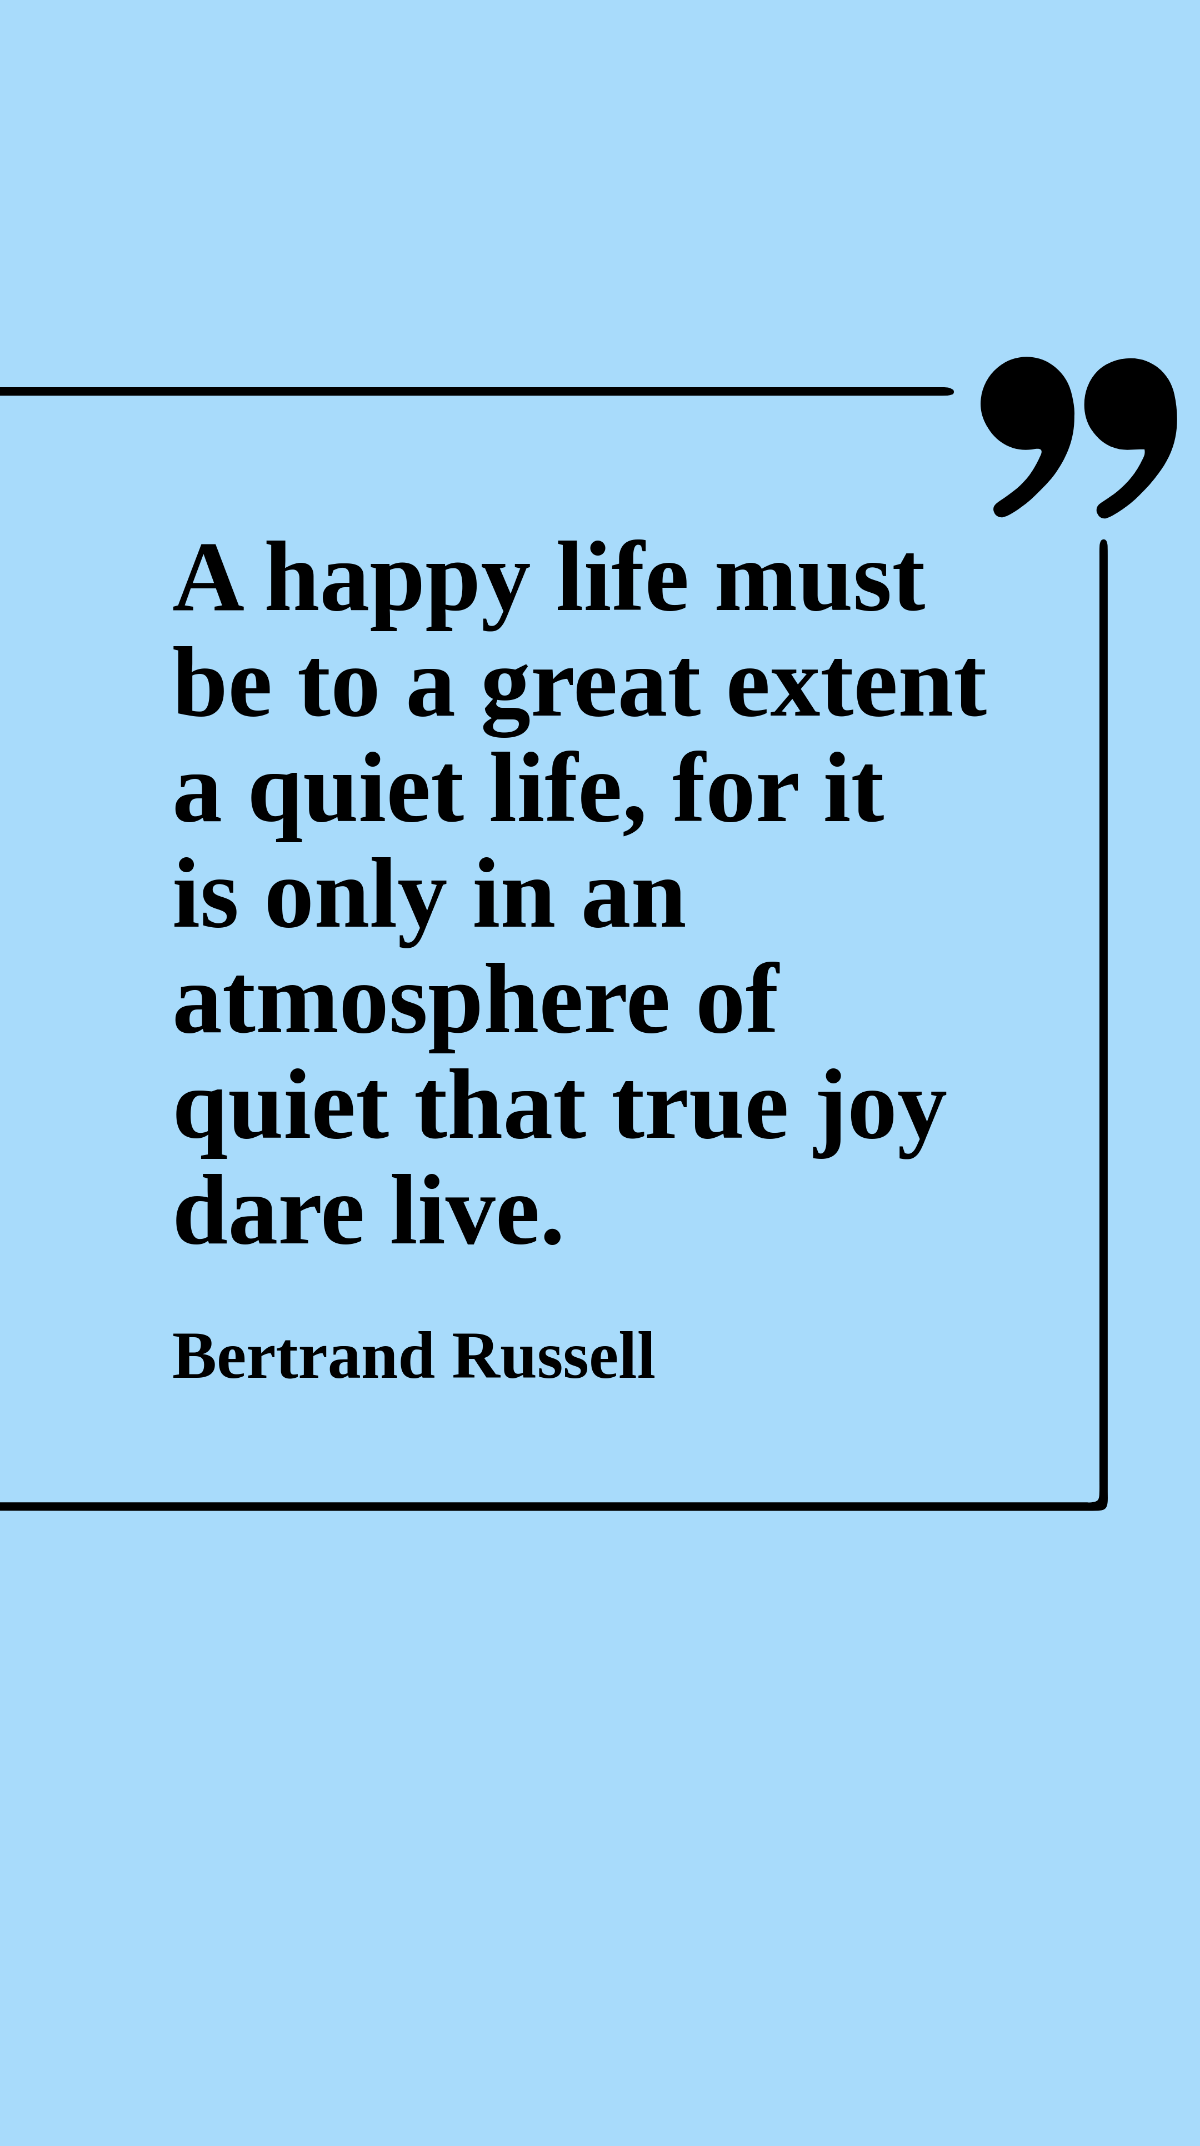 Bertrand Russell - A happy life must be to a great extent a quiet life, for it is only in an atmosphere of quiet that true joy dare live. Template